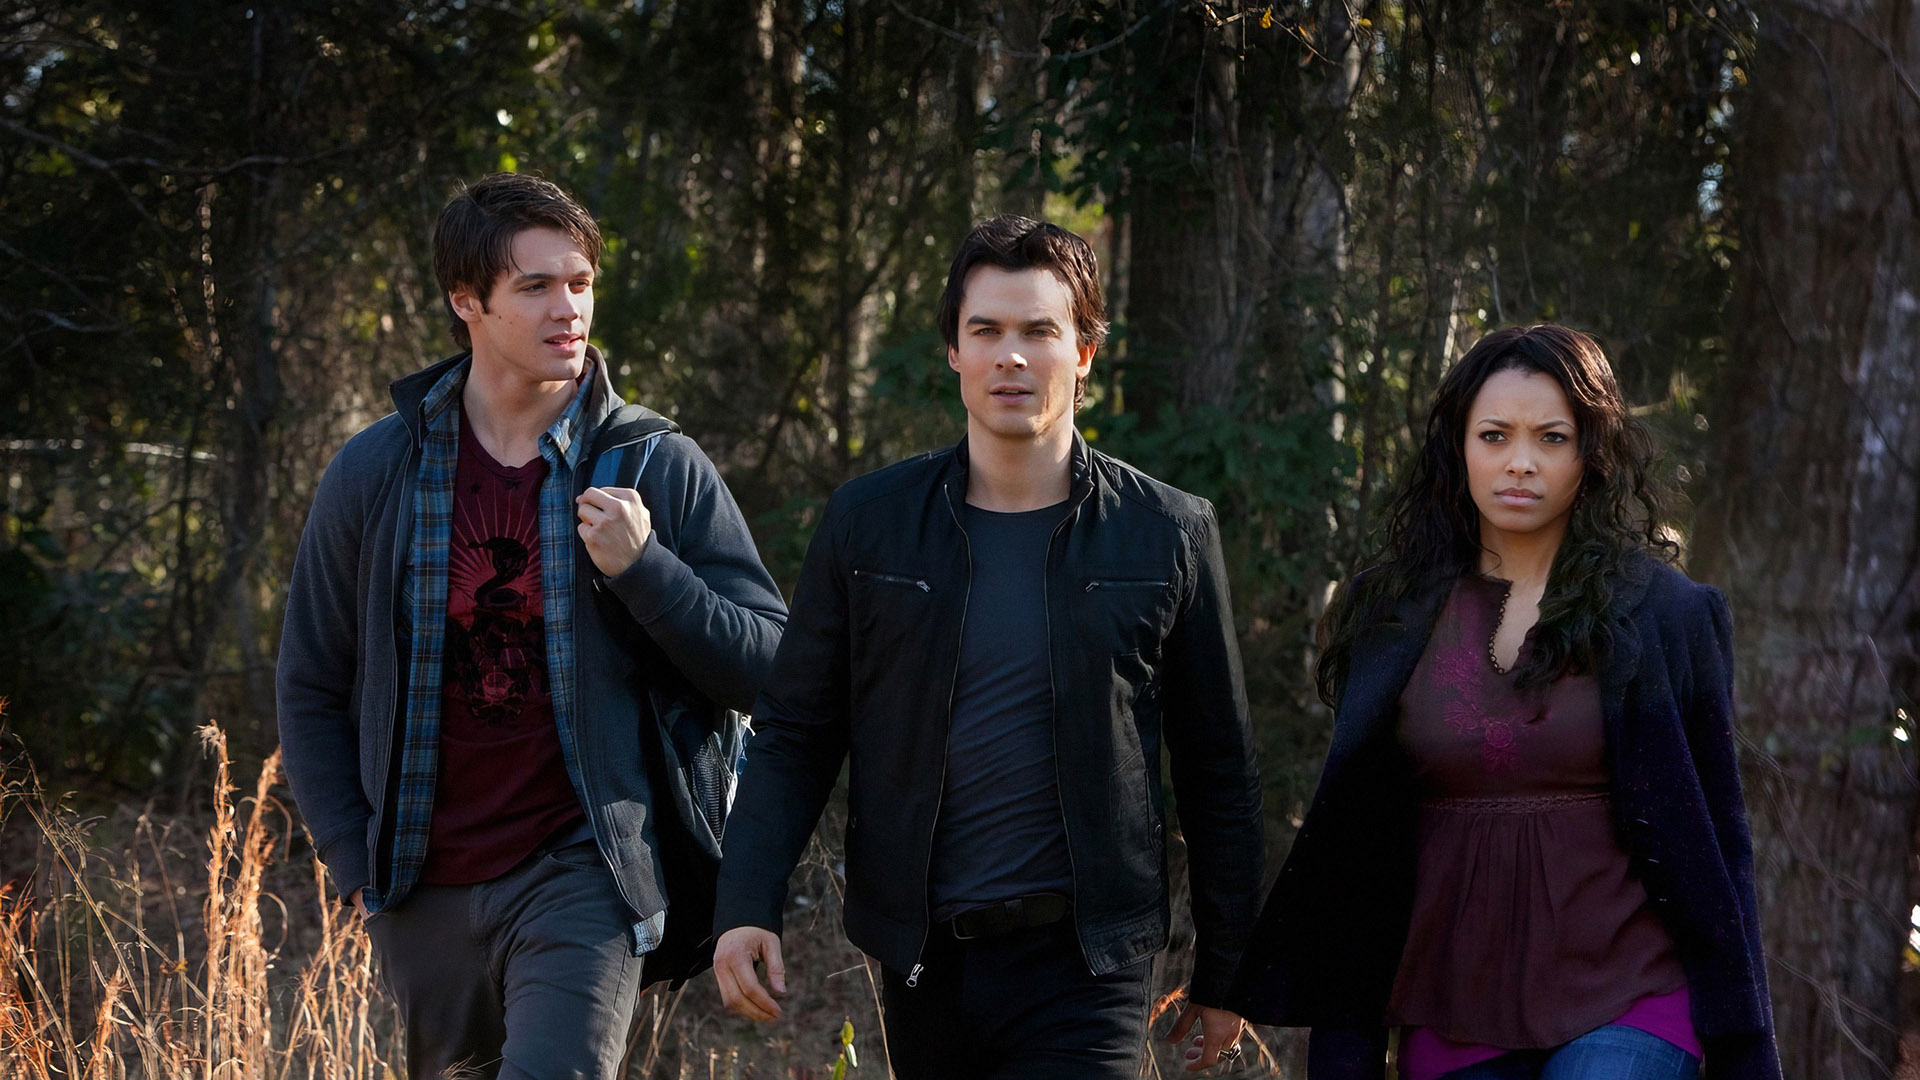 Forget Delena: These 5 Fan Ships Deserved to Be TVD Canon